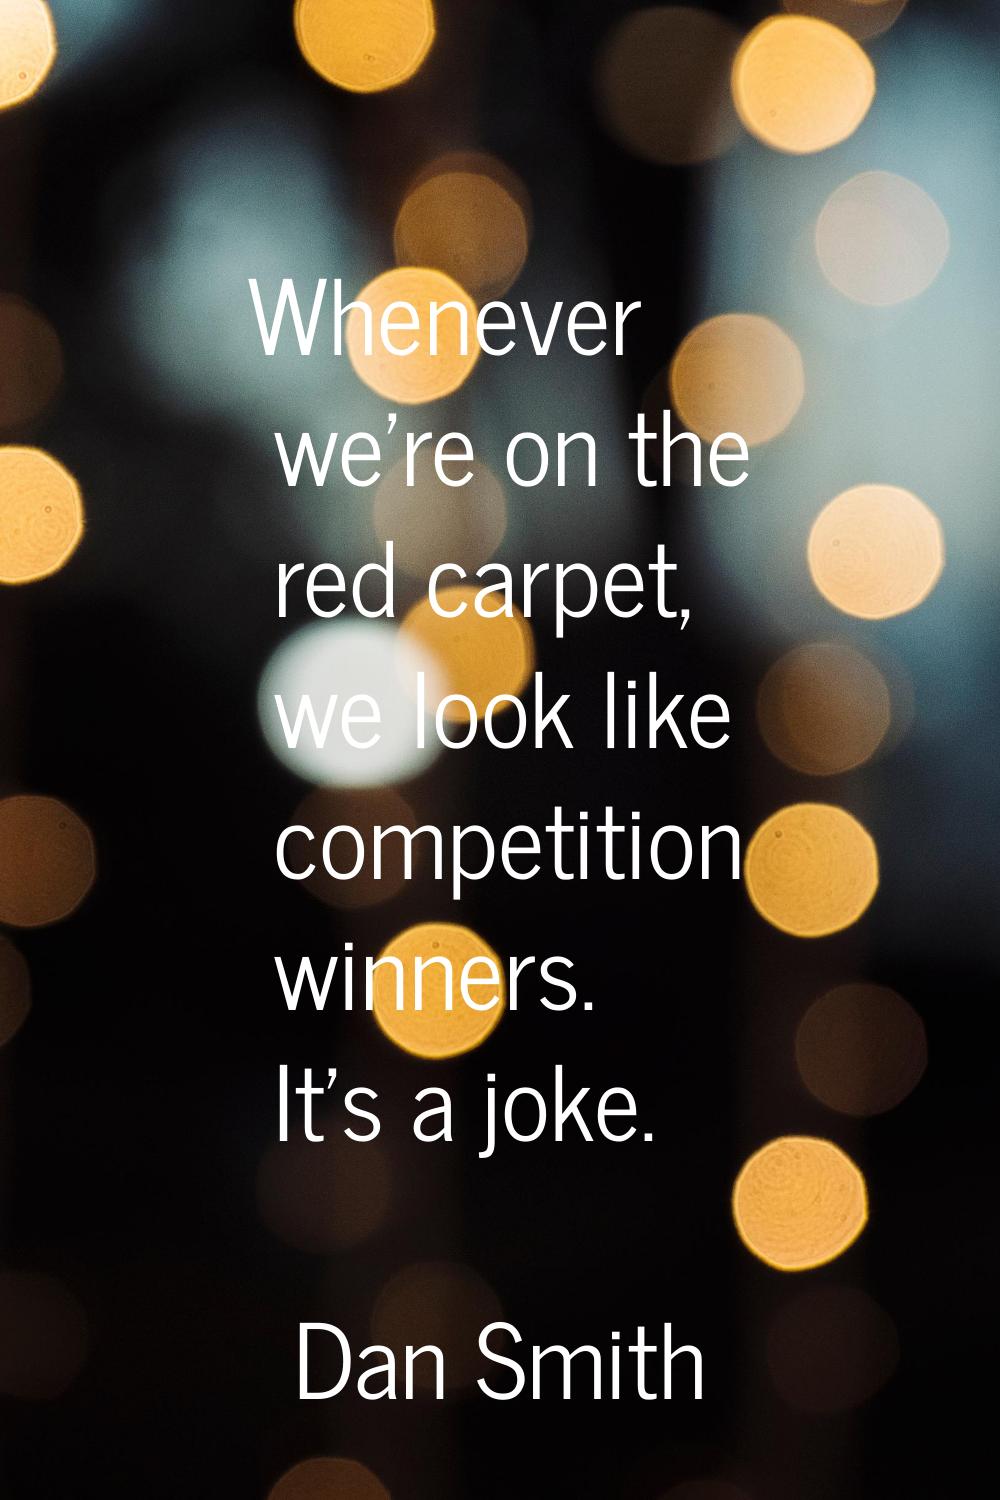 Whenever we're on the red carpet, we look like competition winners. It's a joke.